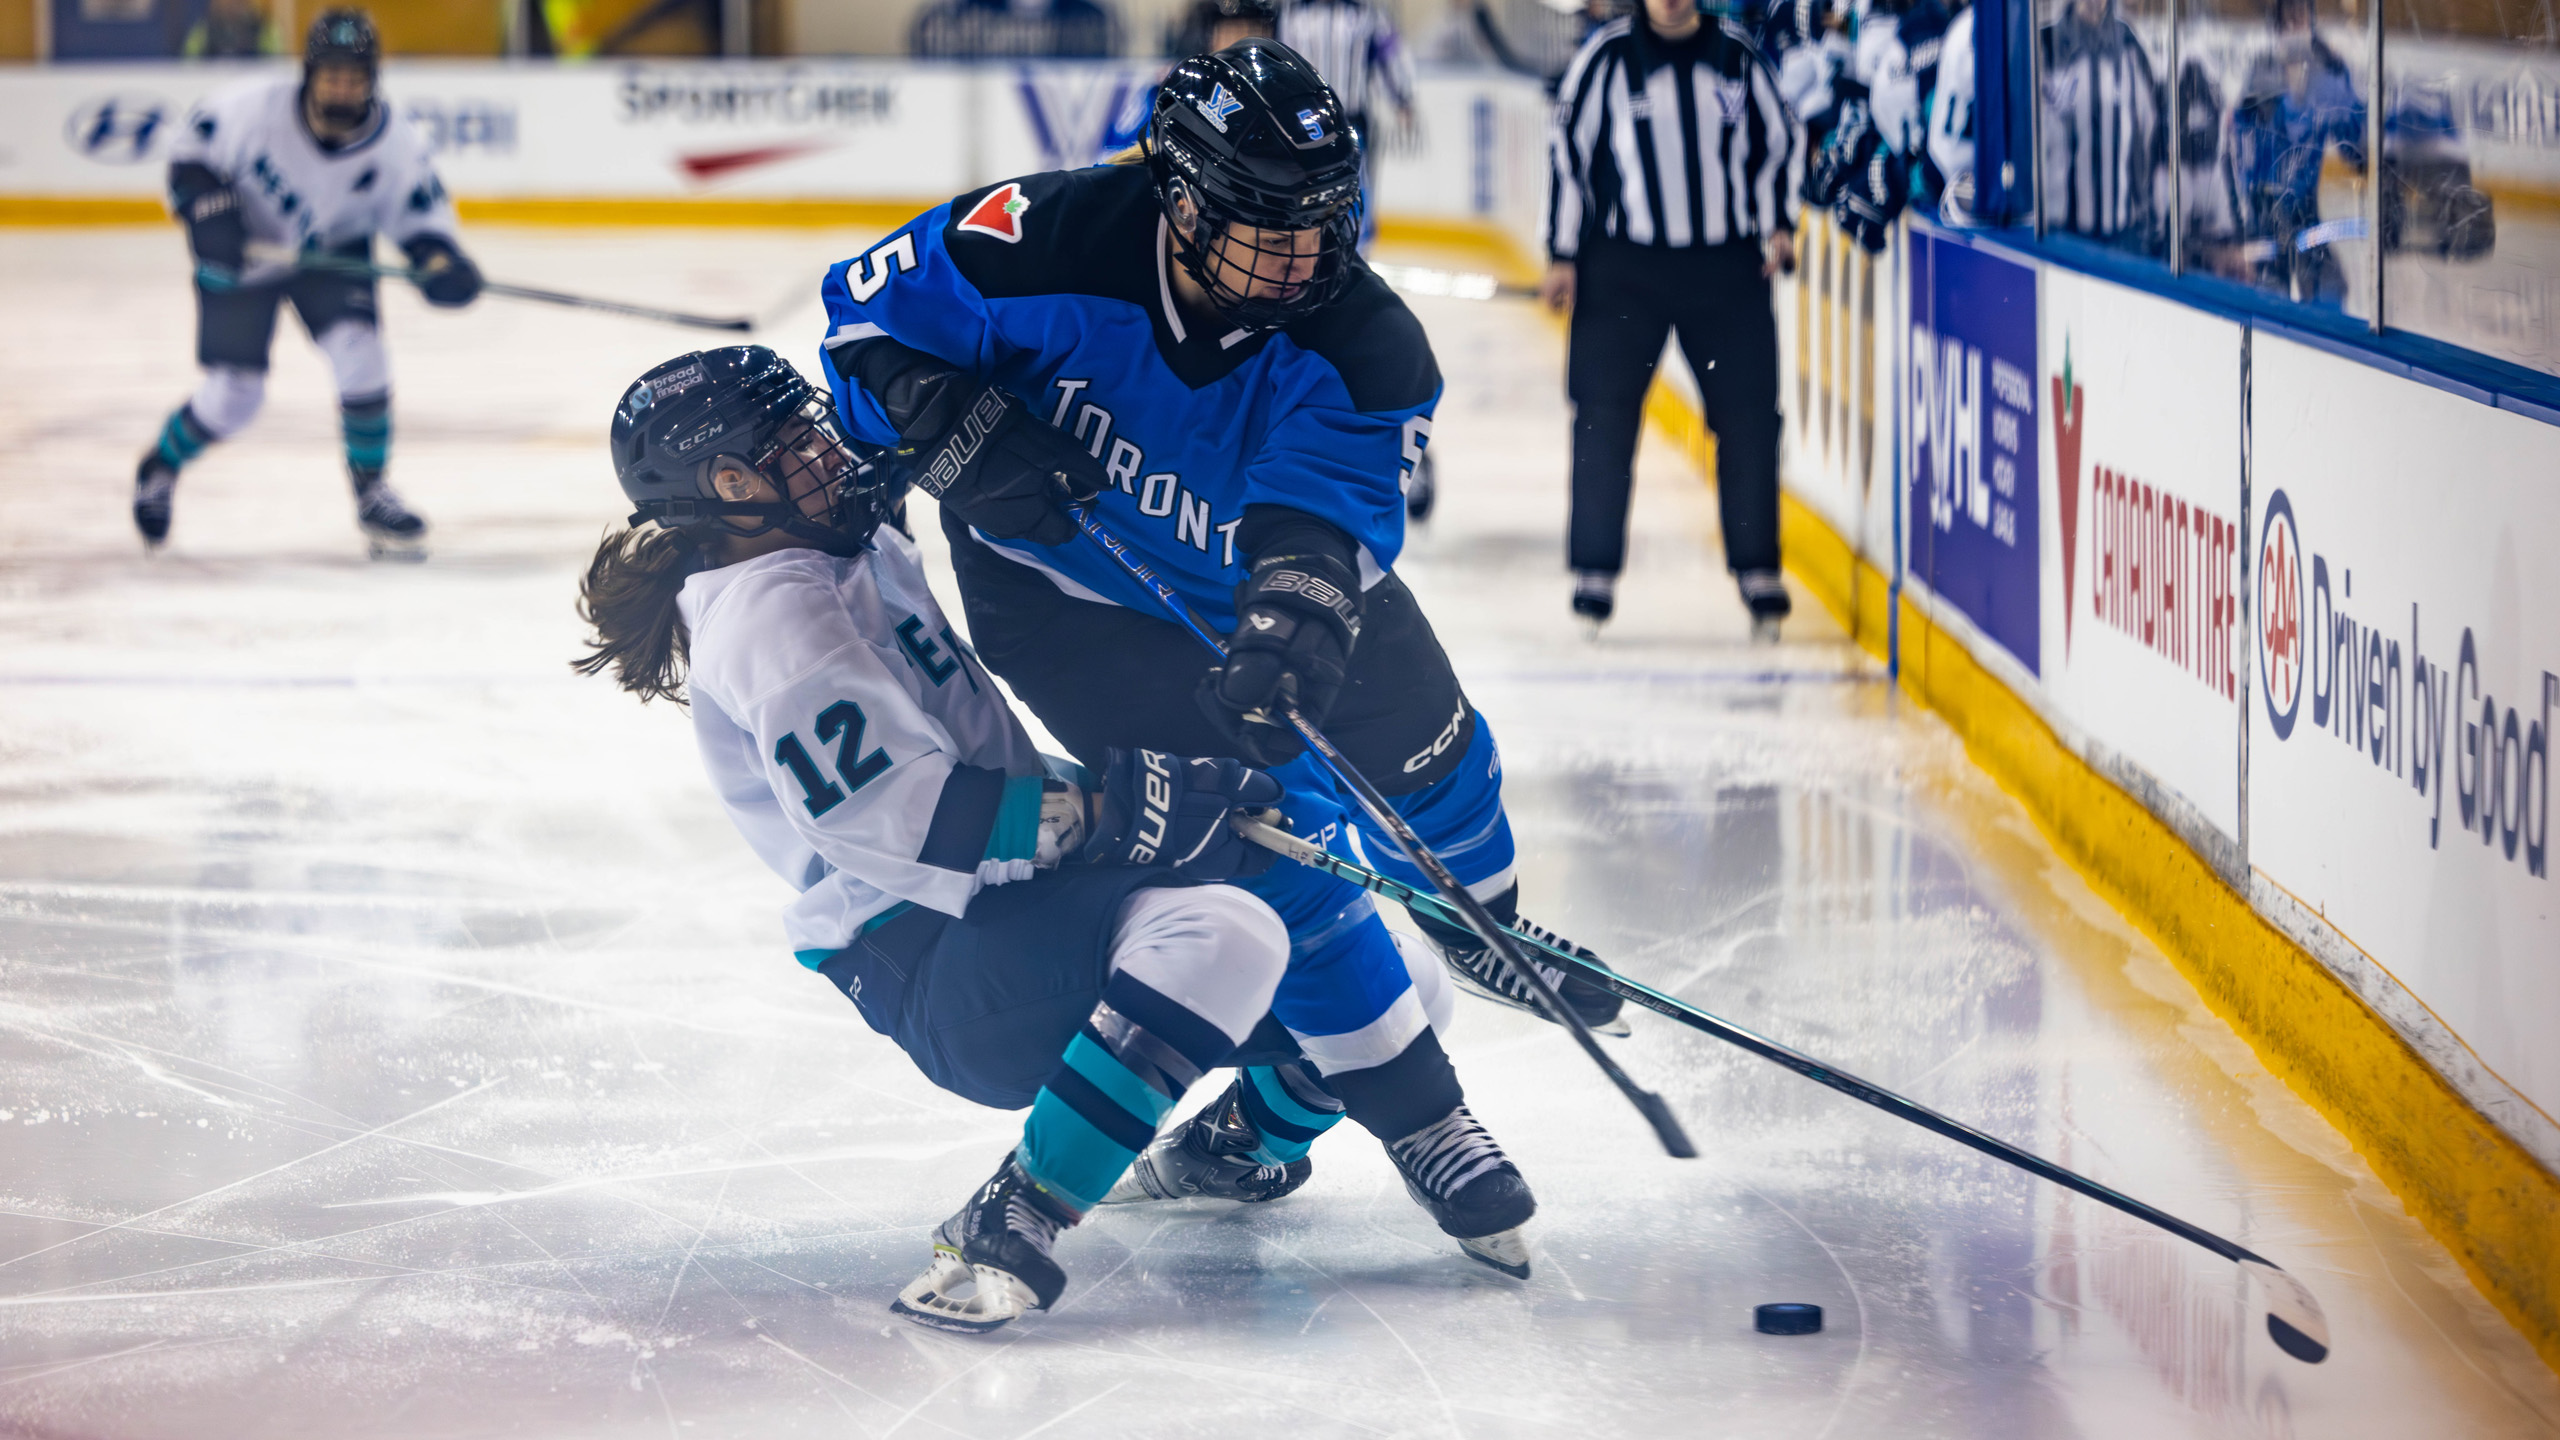 New York player Chloe Aurard collides into the shoulder of Toronto PWHL player Lauriane Rougeau